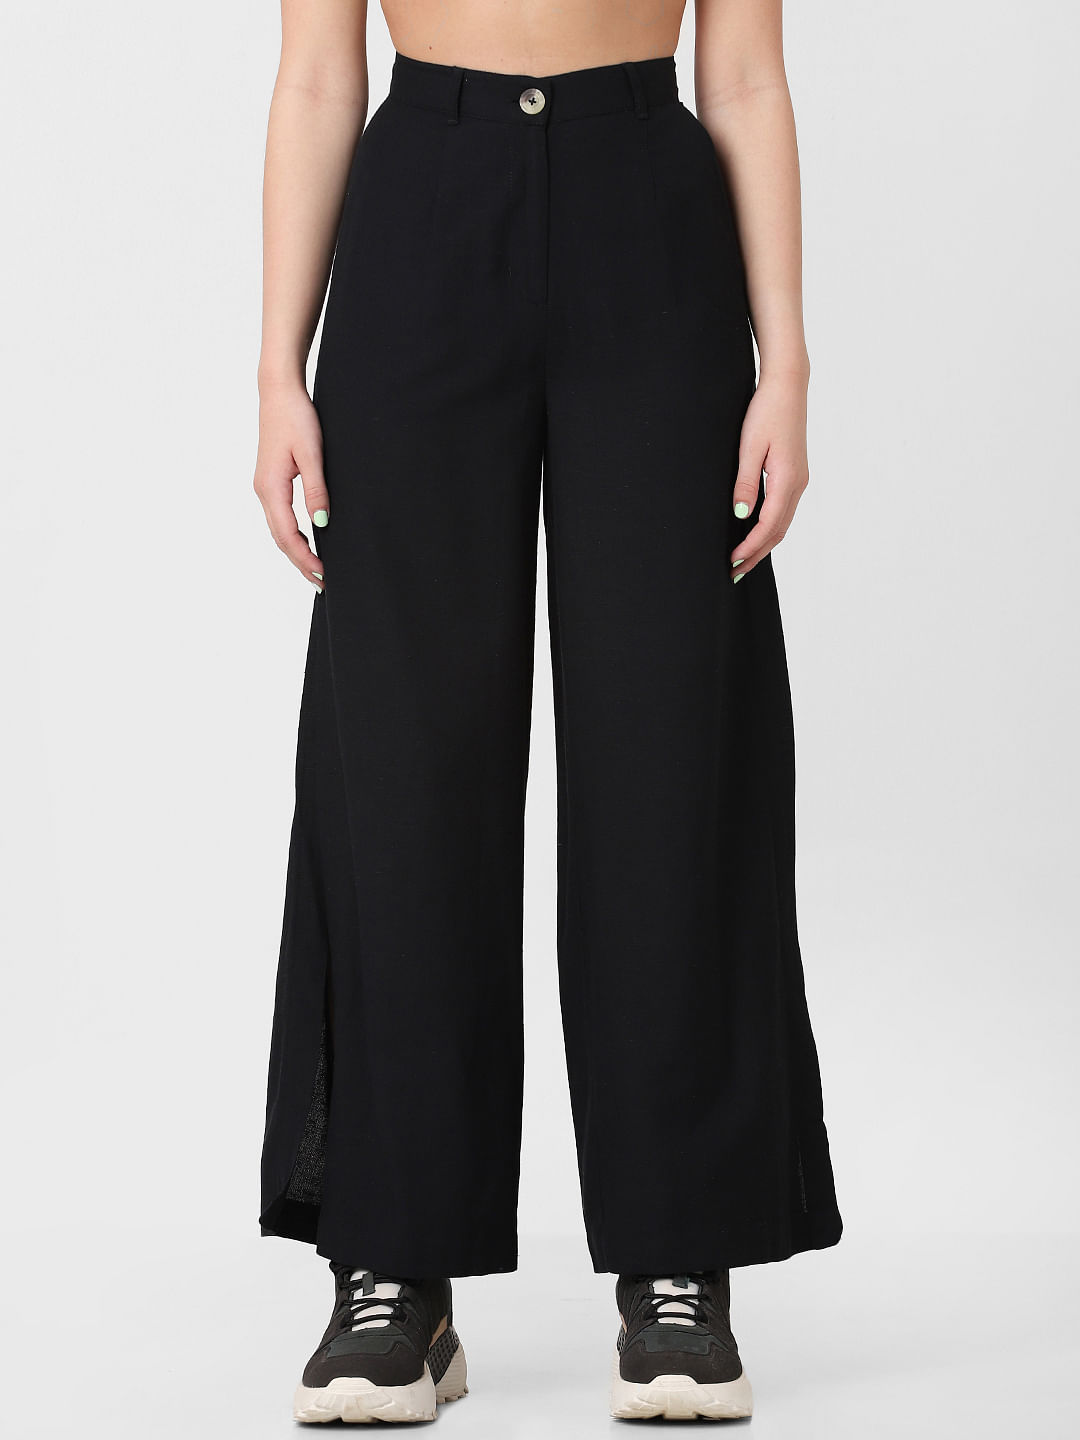 Buy LH Urban Black Solid Formal Trousers Online  488371  The Collective